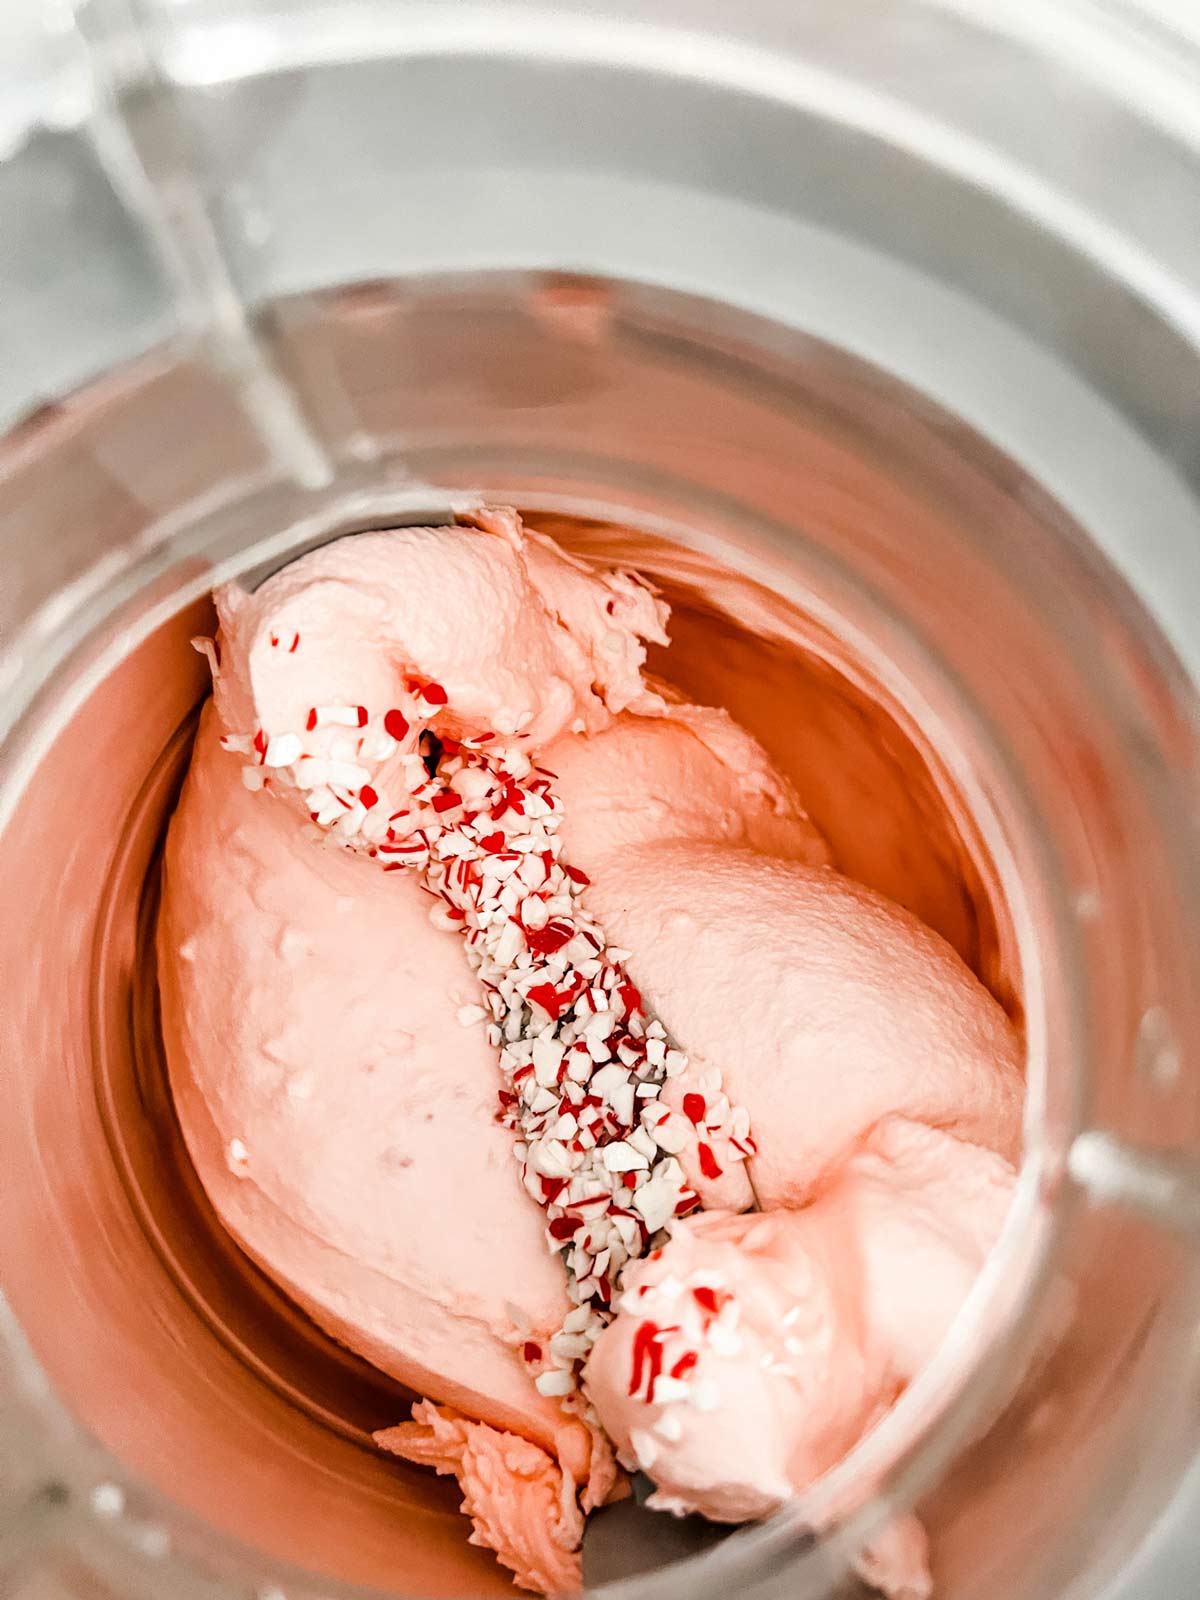 Peppermint ice cream that has started to firm up in the bowl of an ice cream maker.